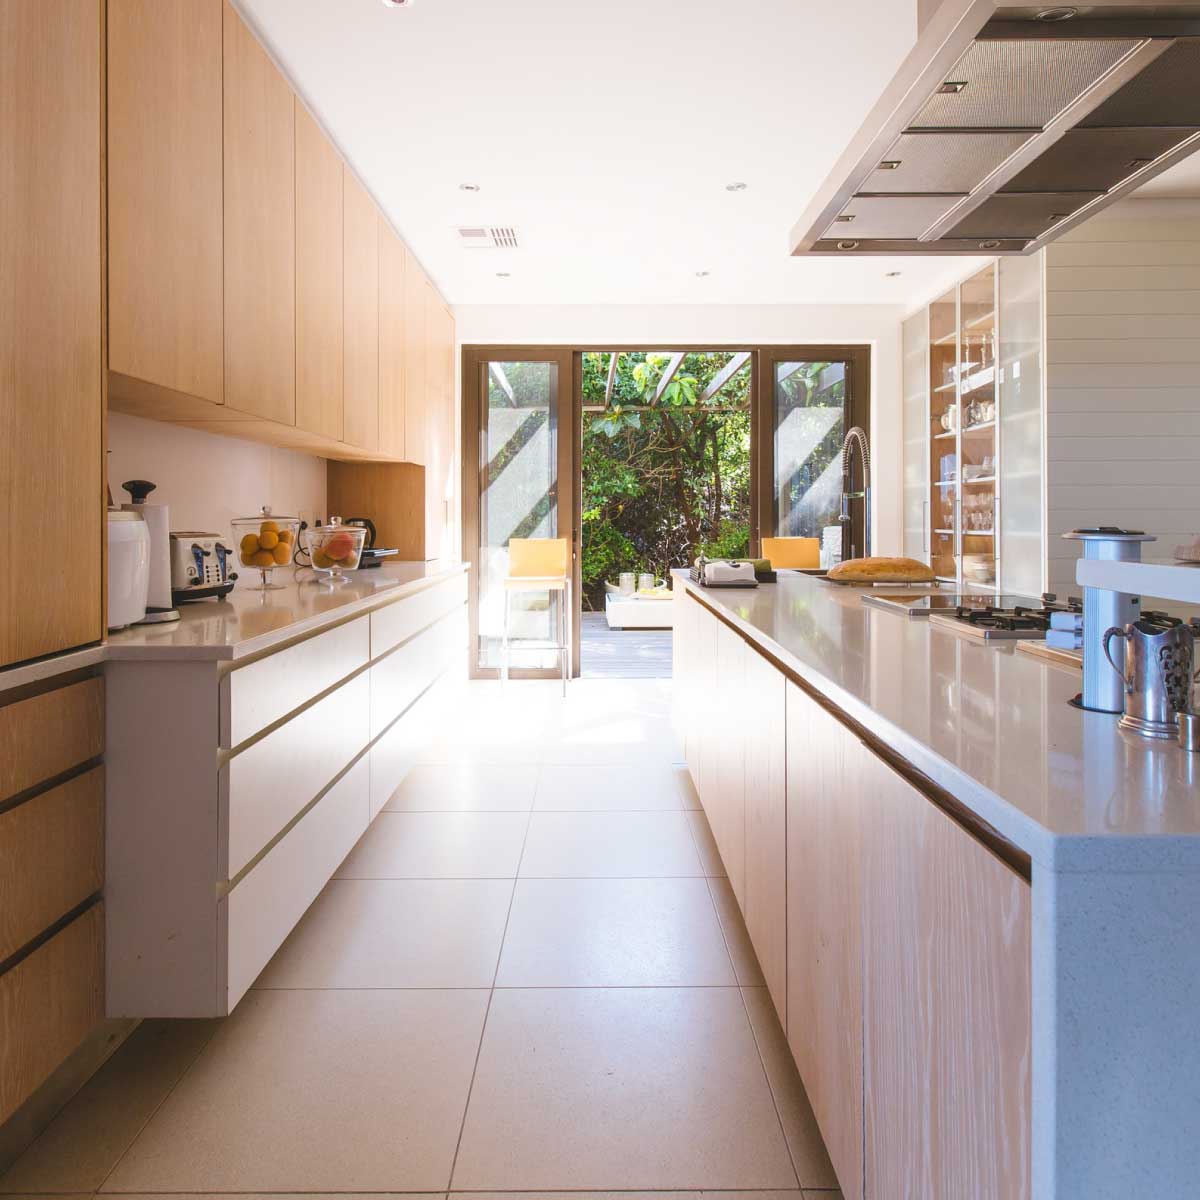 Top Ten Practical Kitchen Design Mistakes and How to Avoid Them